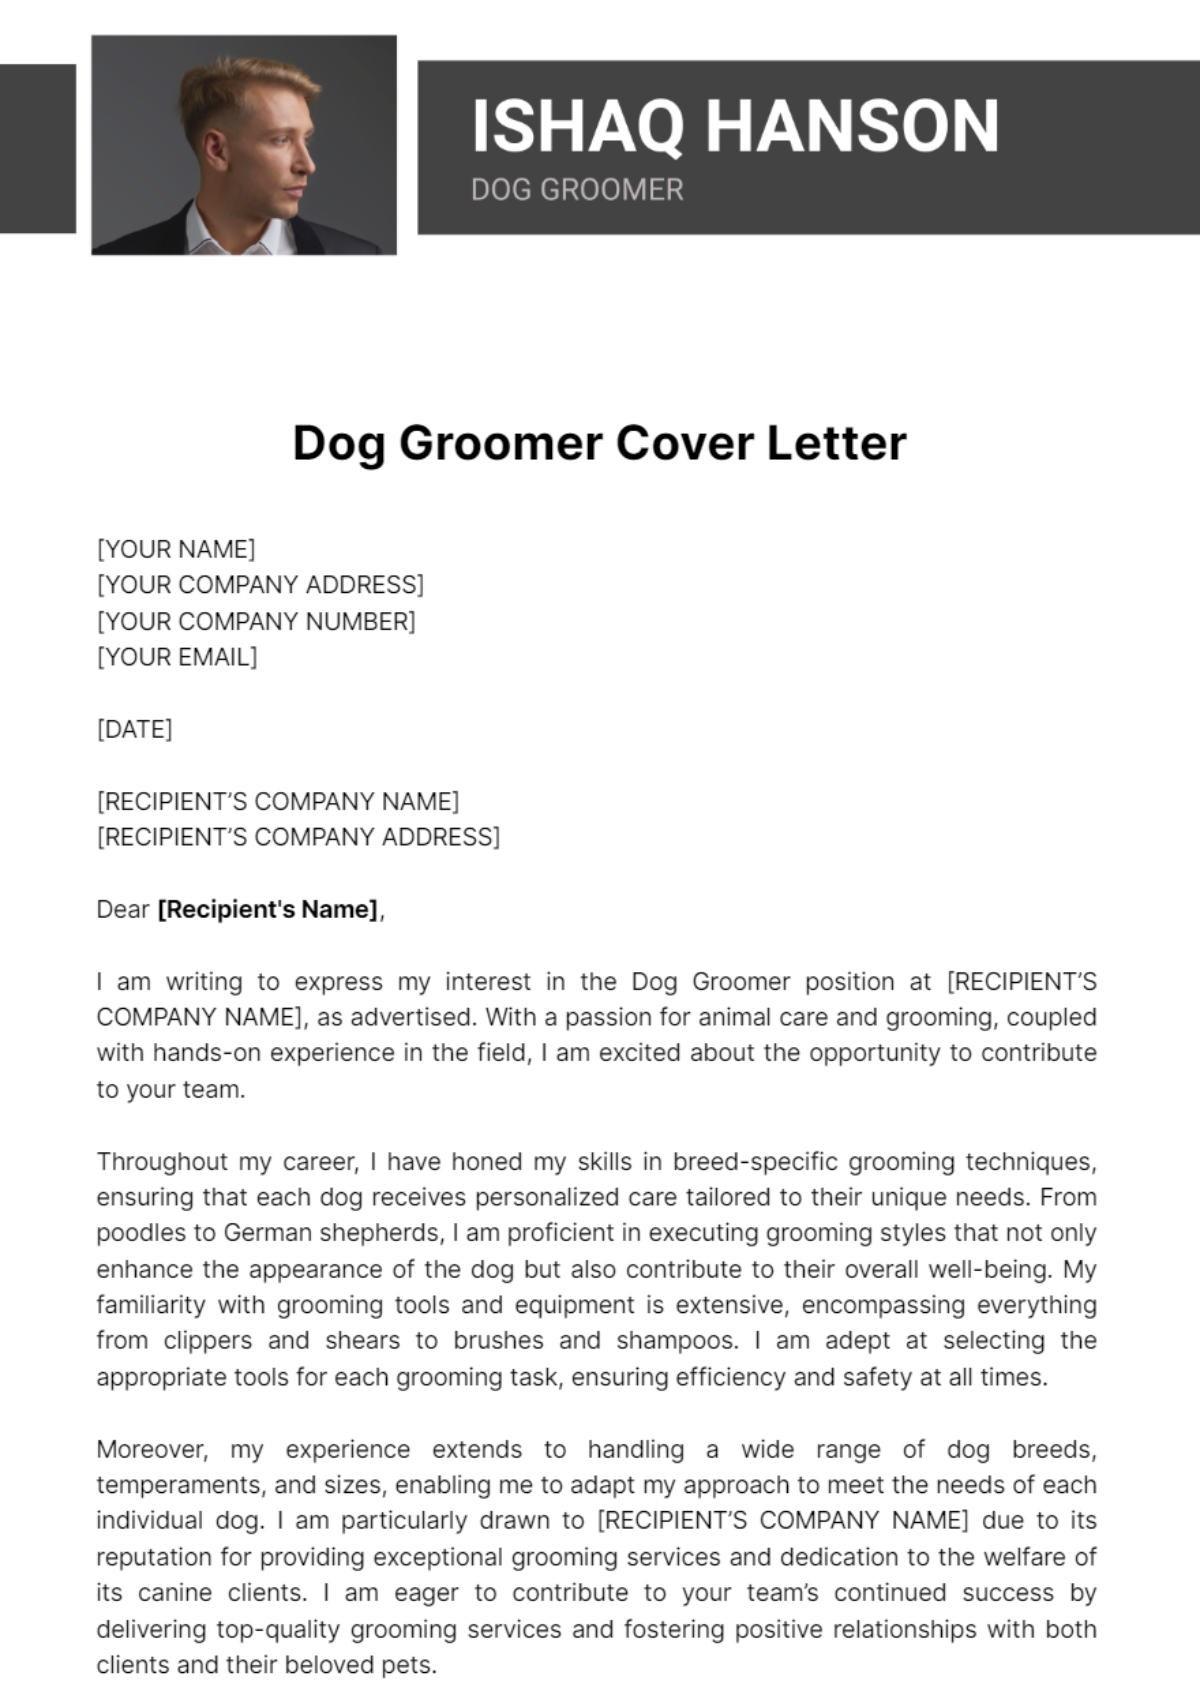 Free Dog Groomer Cover Letter Template